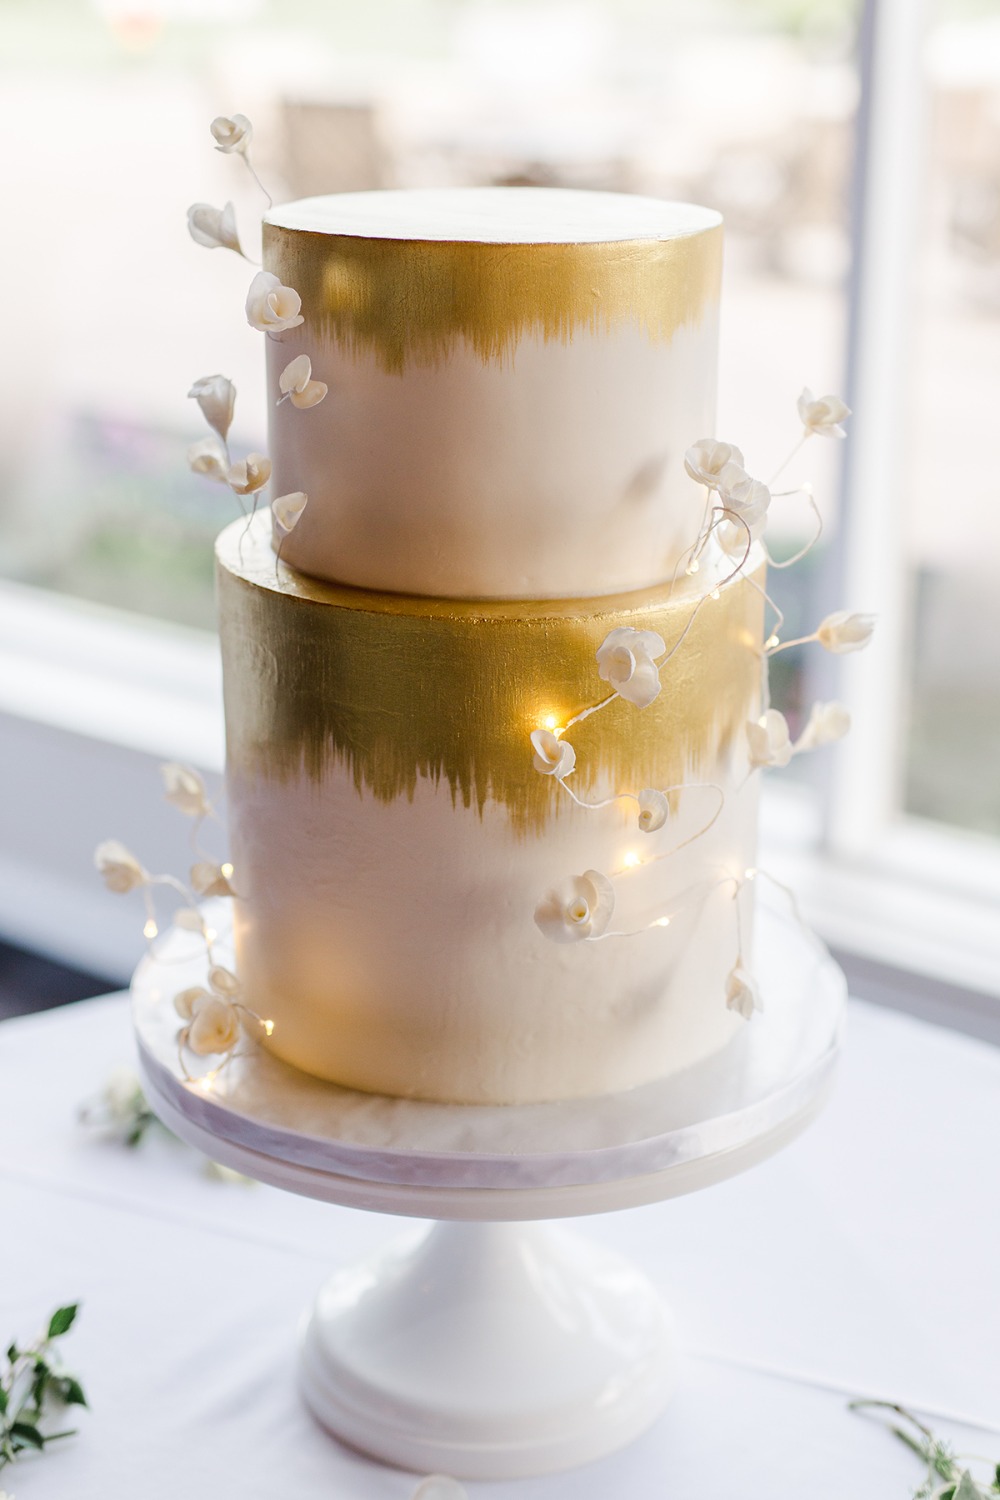 gold leaf painted cake with fairylight accents